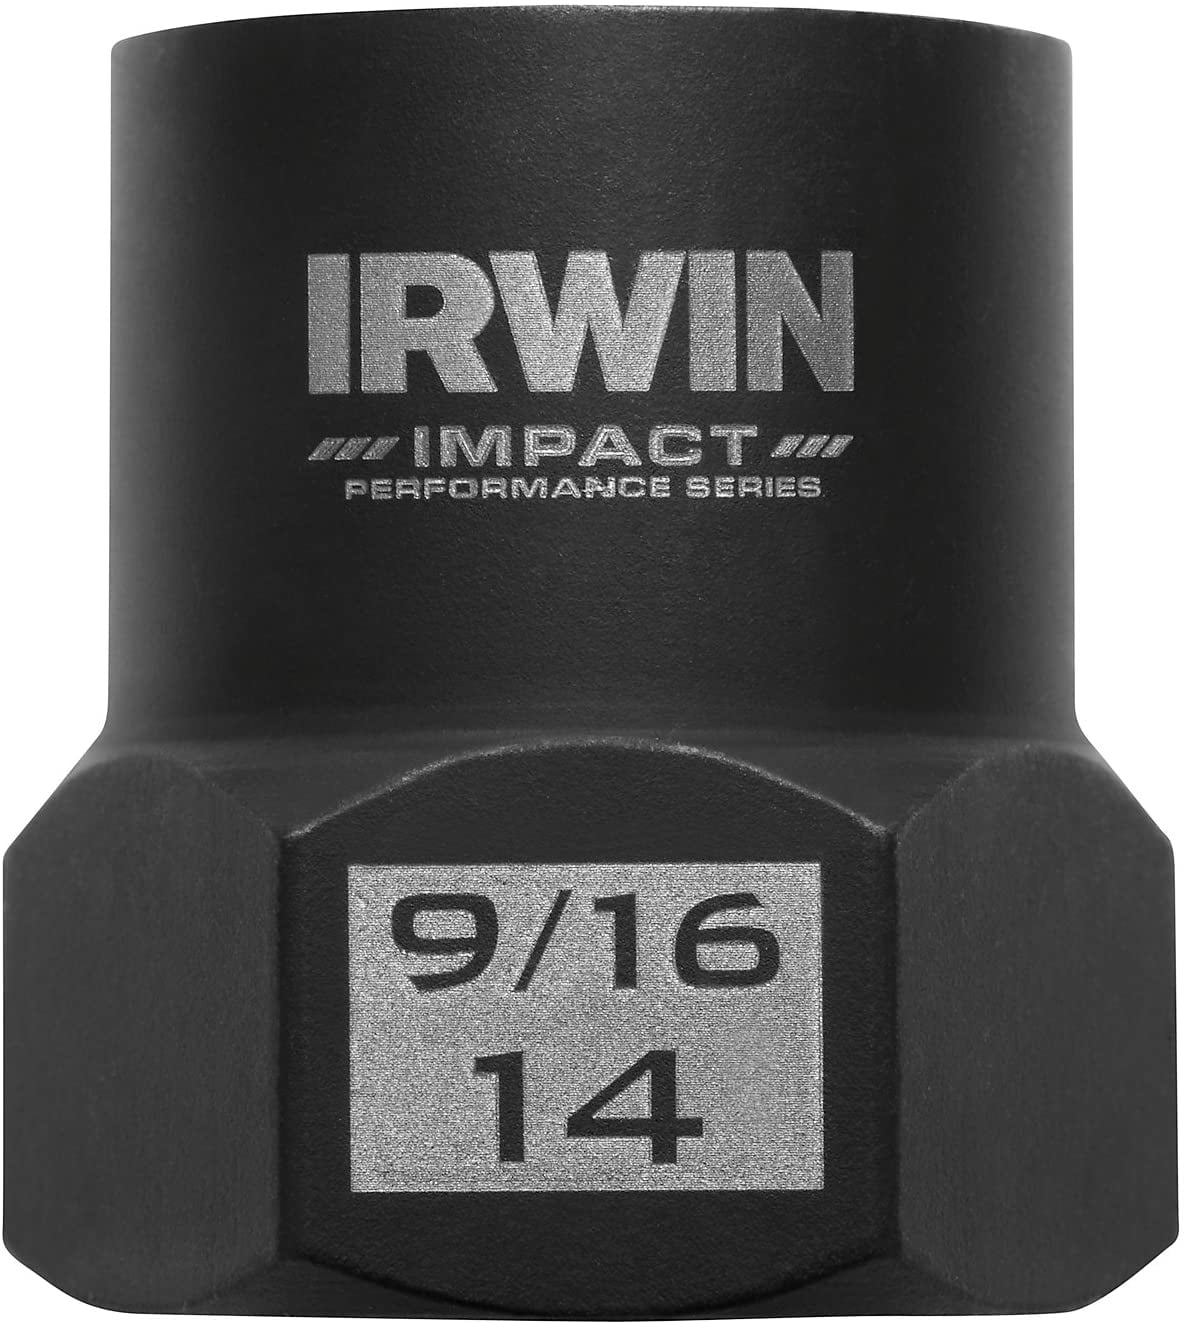 Irwin Tools 53909 Accessories Impact Bolt Grip 9/16/14mm 3/8 Dr Impact Bolt Grip 9/16/14mm 3/8 Dr 